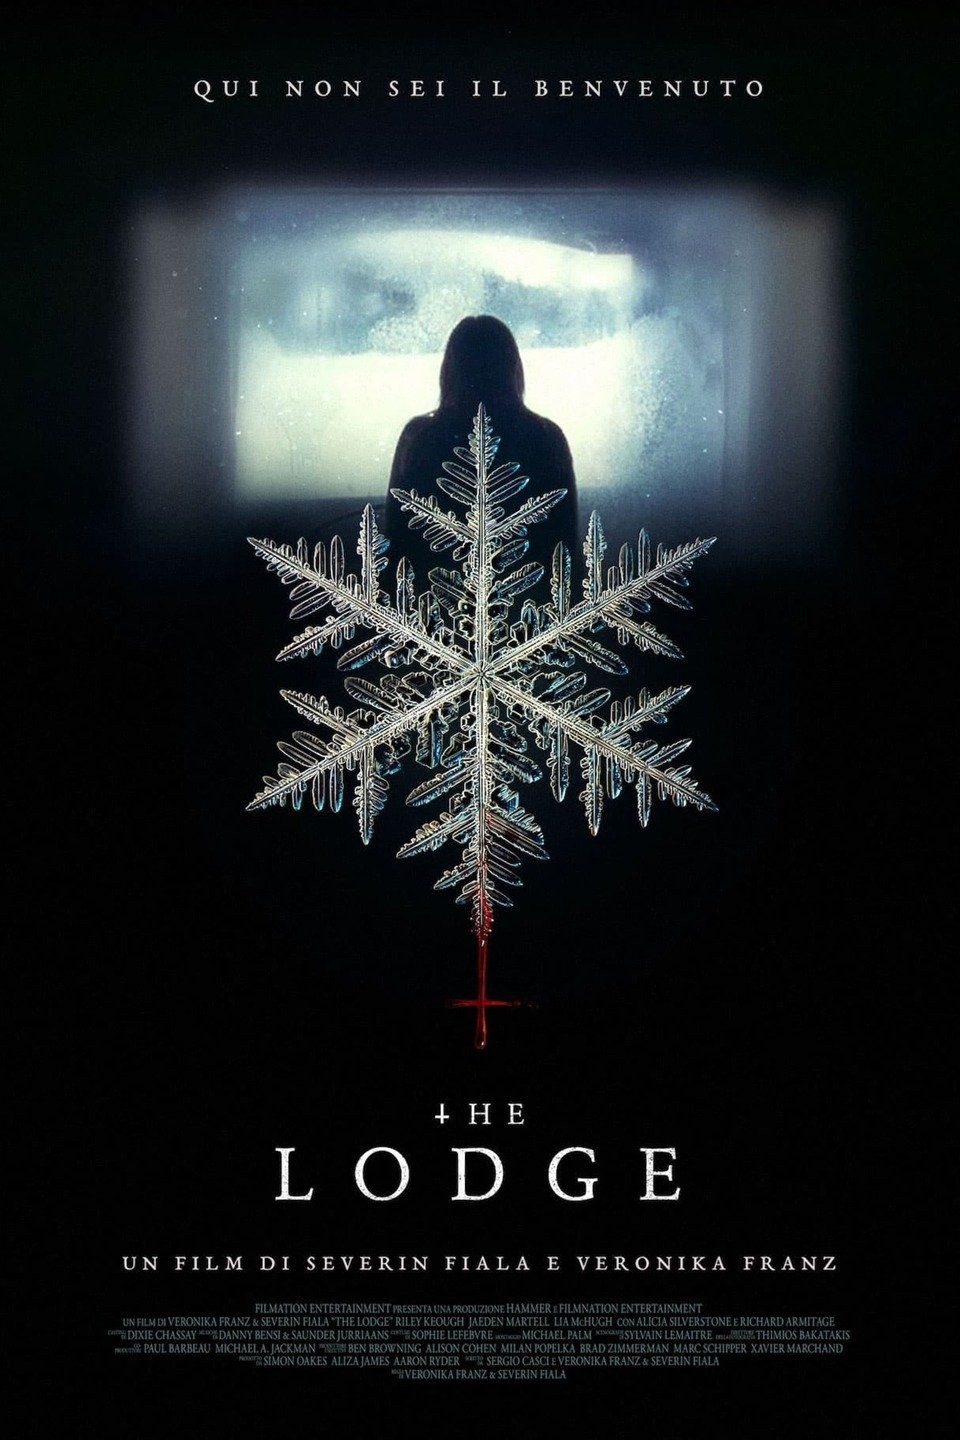 The Lodge movie review & film summary (2020)